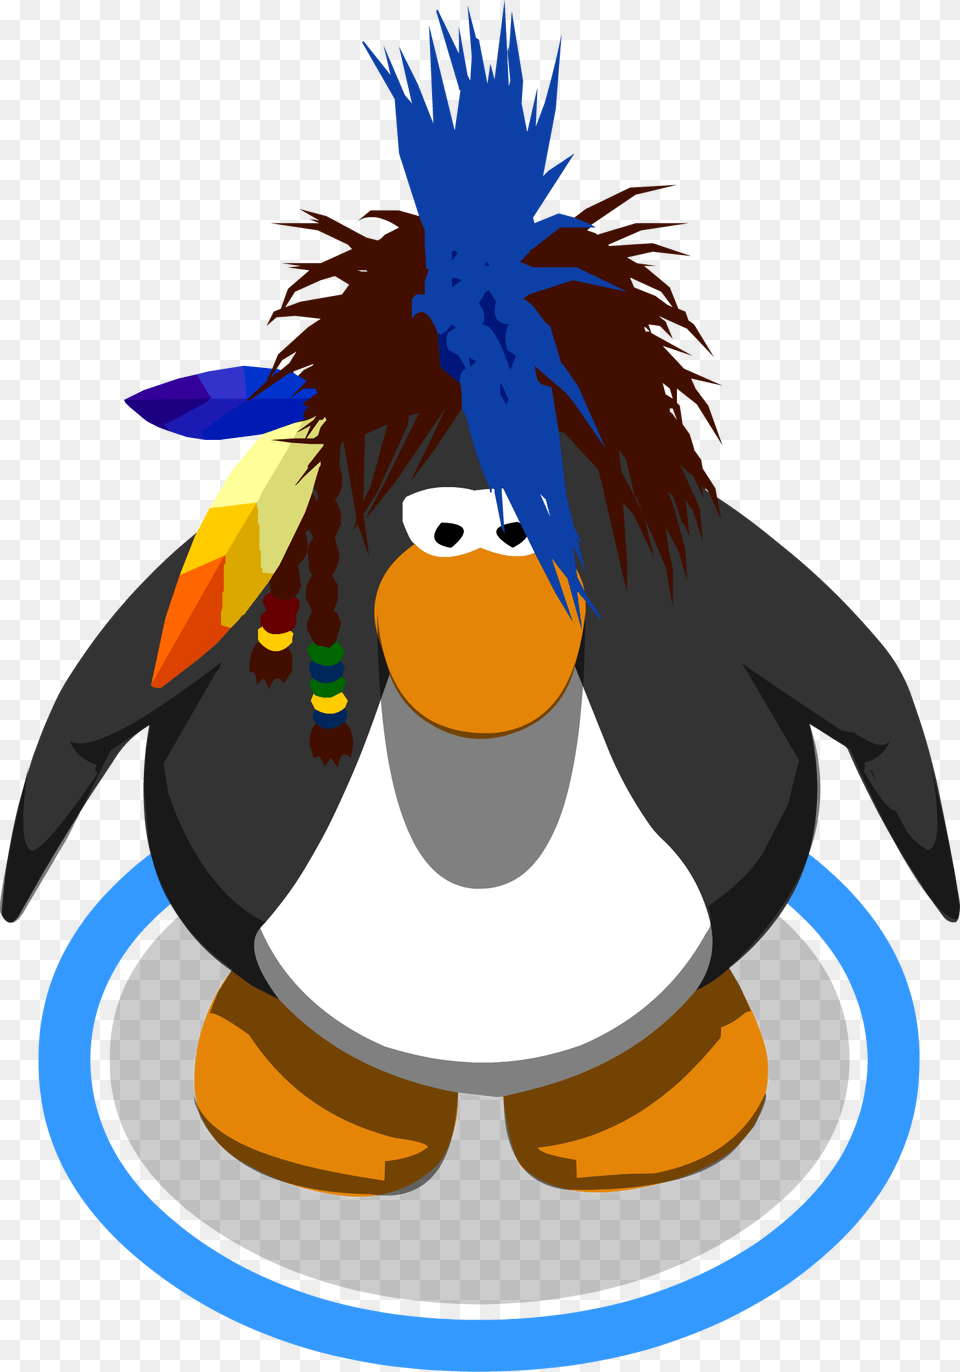 The Adventurer Club Penguin The Popstar, Person, Animal, Bird Free Png